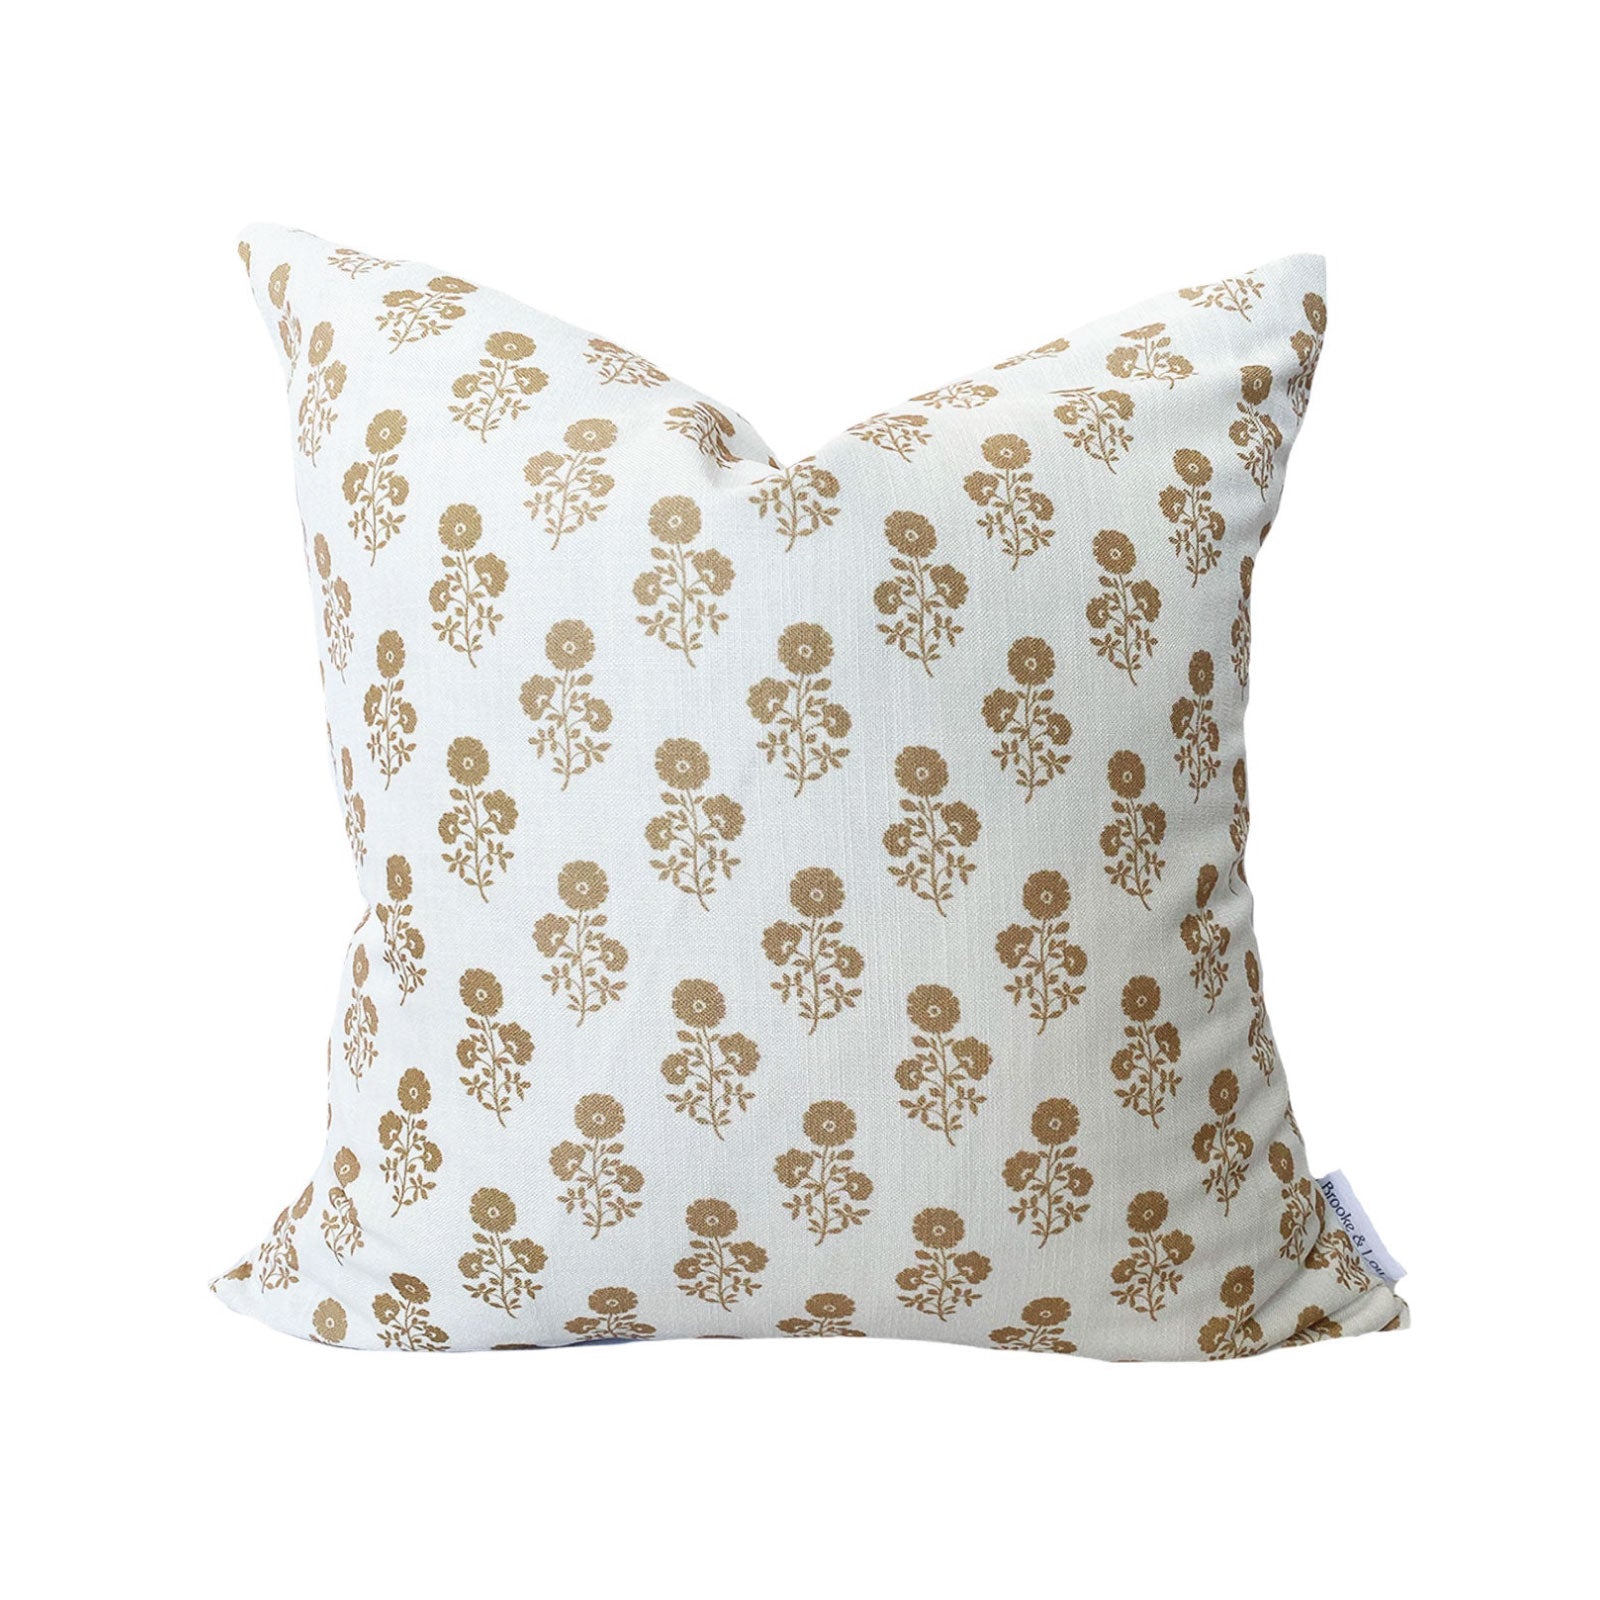 Julia Floral Pillow in Camel on White